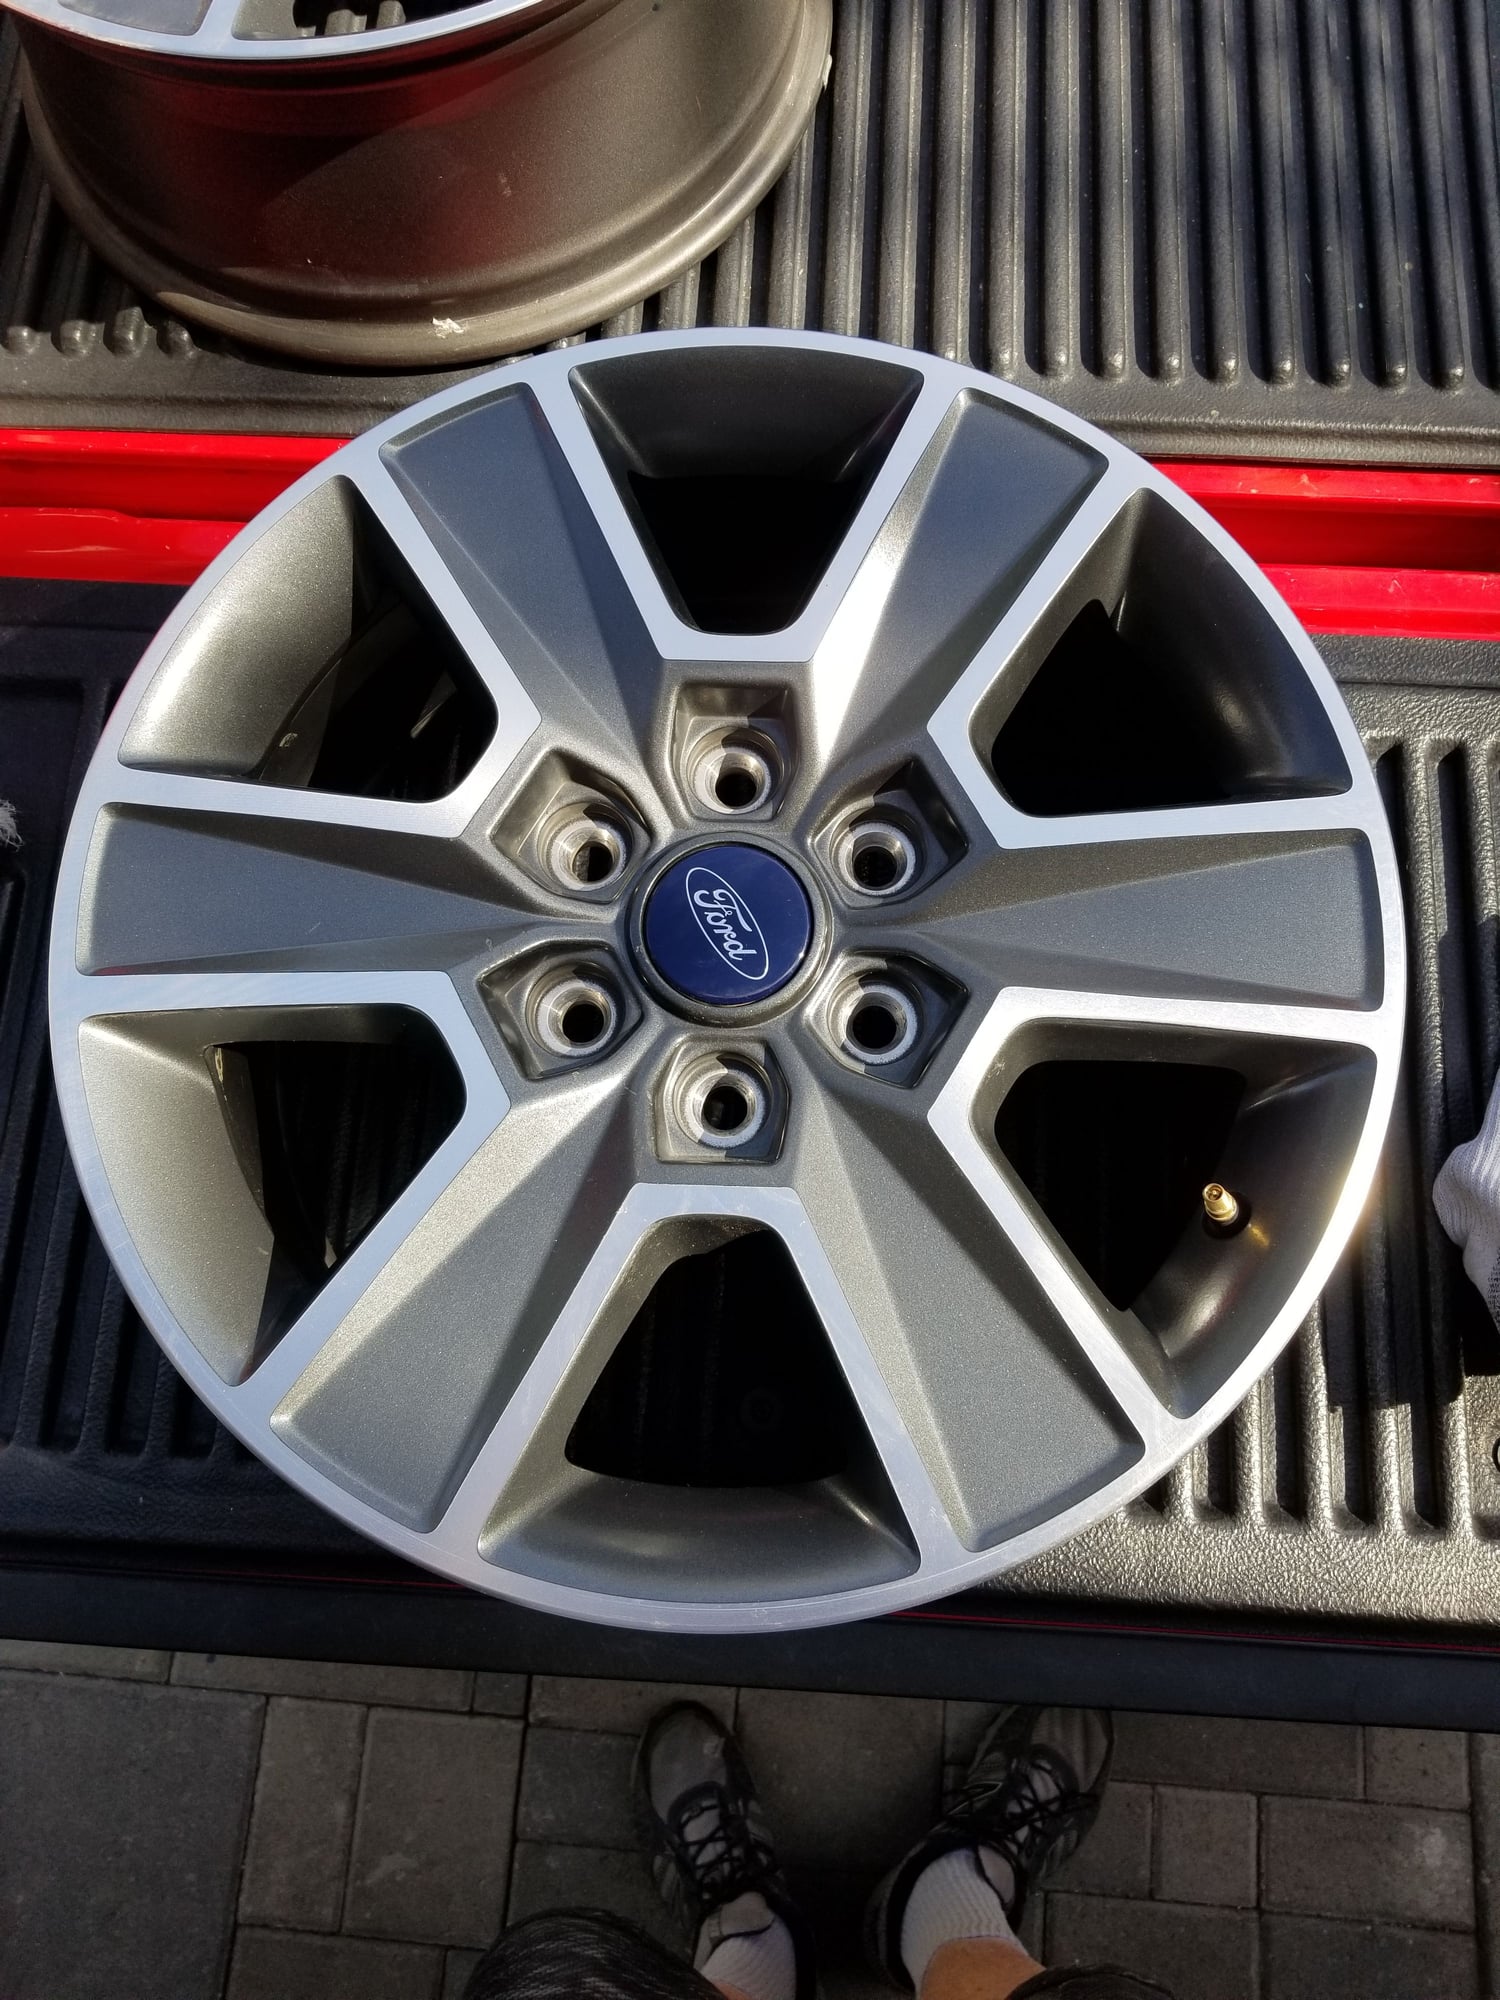 Wheels and Tires/Axles - 2017 F150 18" Alloy Wheels - Used - 2015 to 2021 Ford F-150 - Pasadena, CA 91106, United States